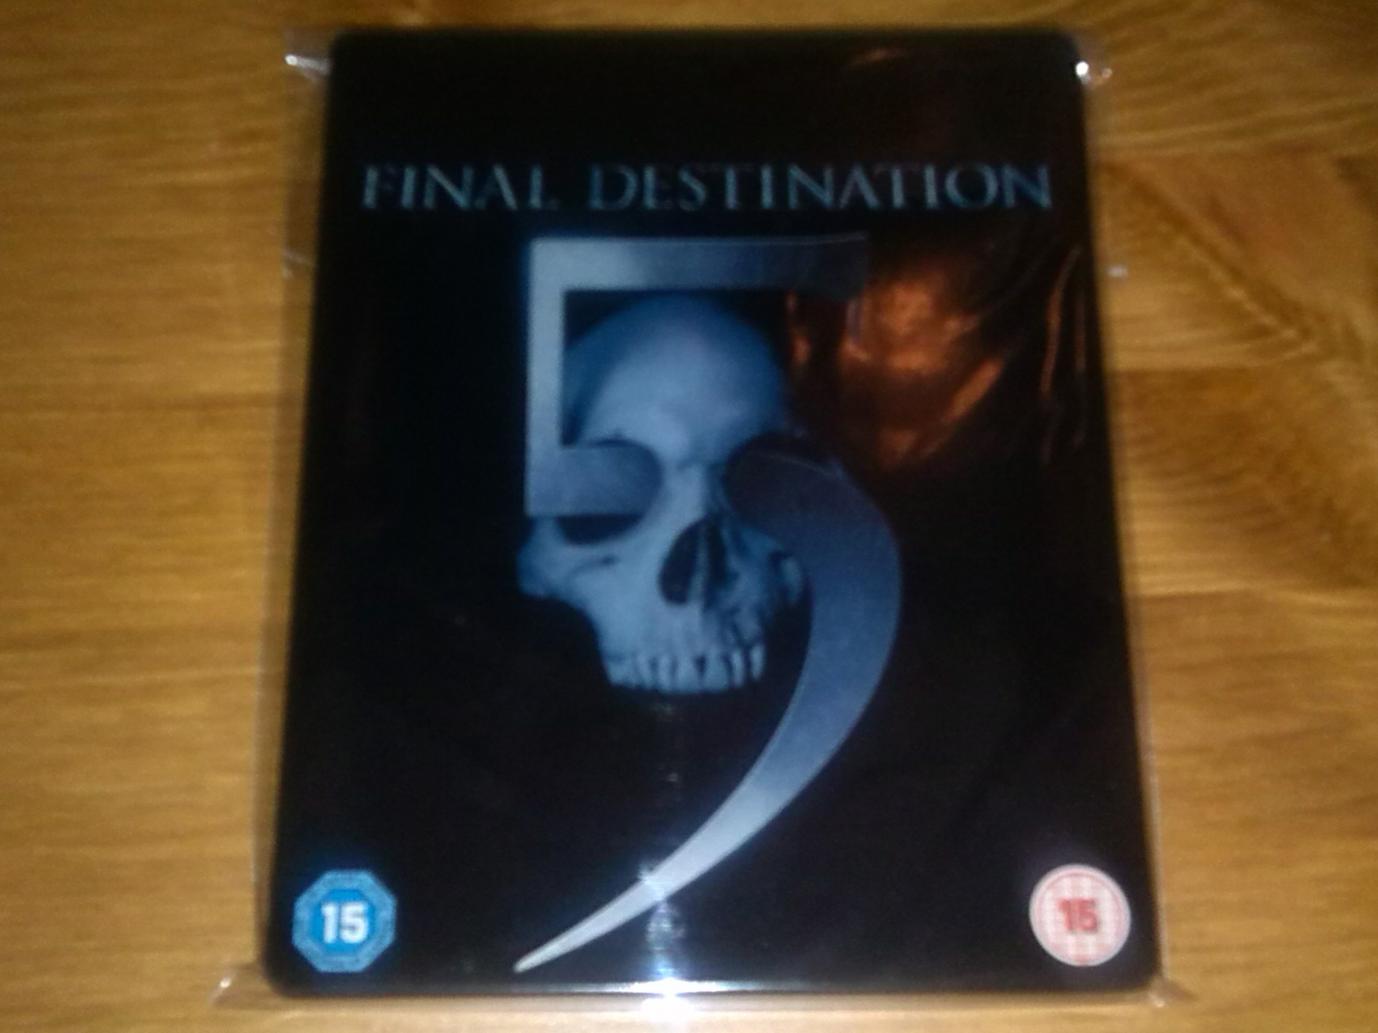 Final Destination 5

It was free from C.E.X. as I had a £2.50 voucher and that's how much it cost.